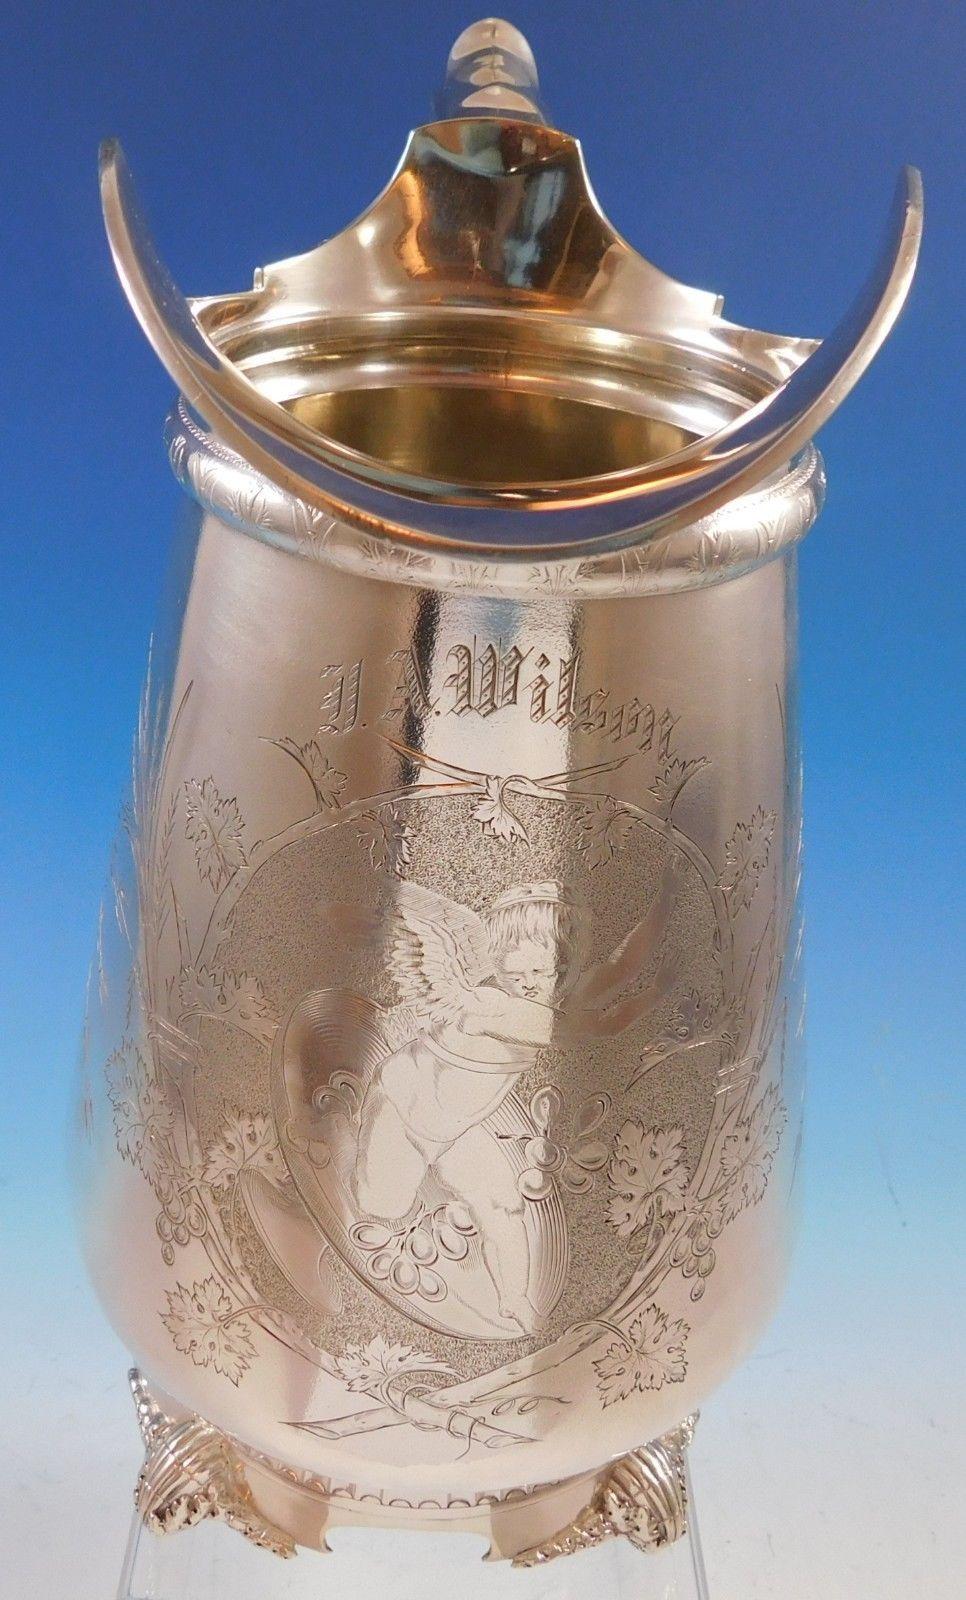 Gorham
Gorham sterling silver water pitcher featuring a large detailed engraving of a winged angel and grapes. This piece measures 11 x 9, weighs 34.3 troy ounces, and is monogrammed (see photos). It is marked #785 and date mark for 1871. It is in